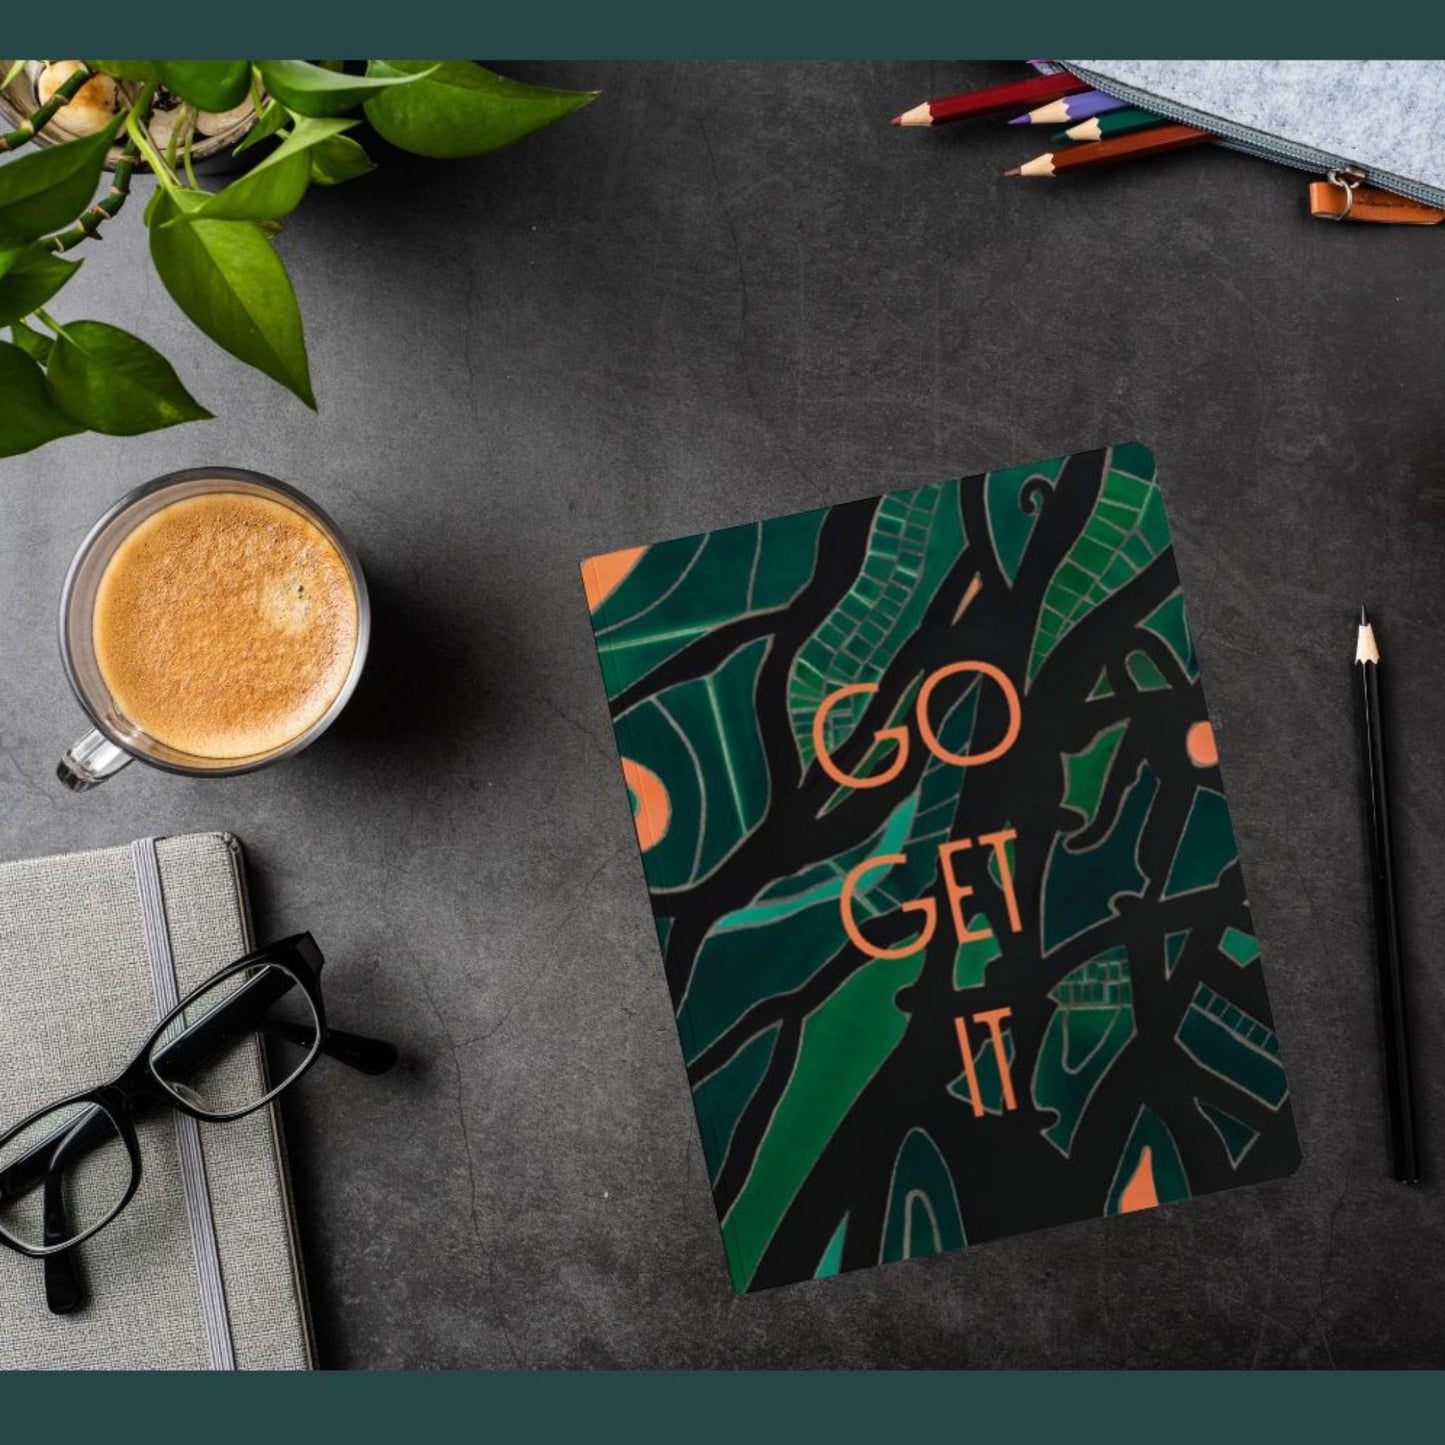 Go Get it Notebook with Pencils, Cup of Coffee and Glasses